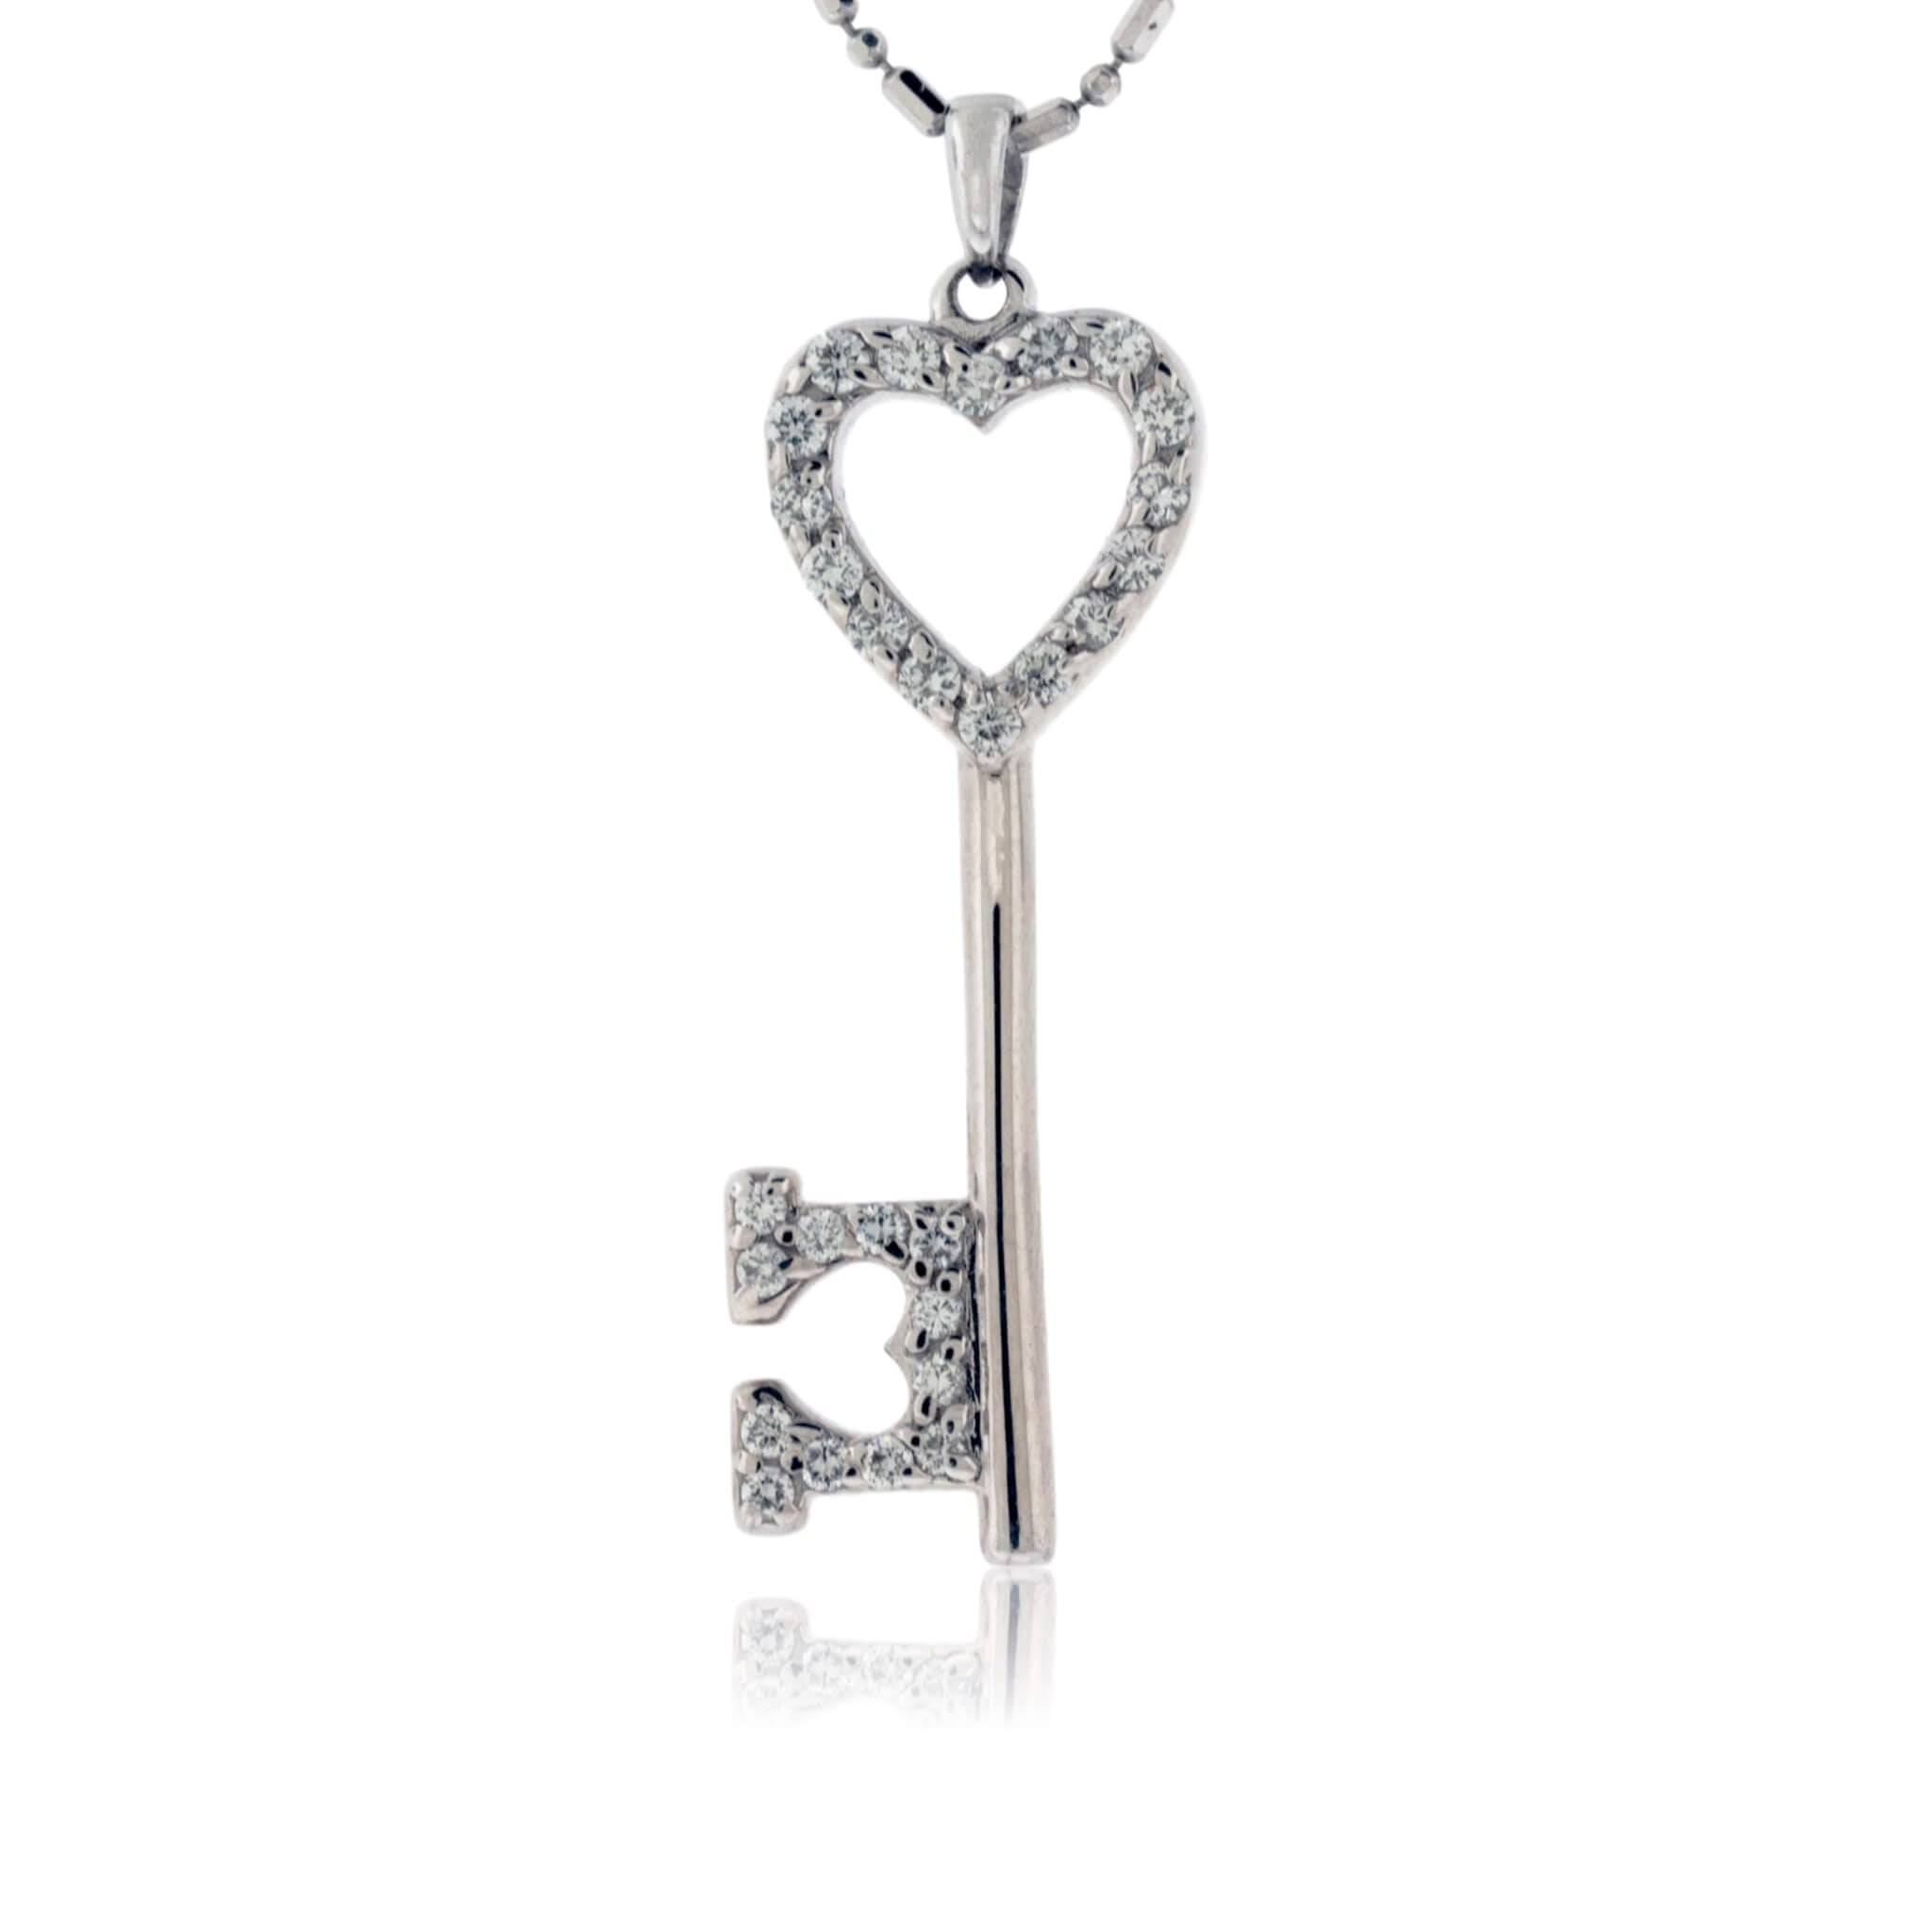 The Key to My Heart Necklace